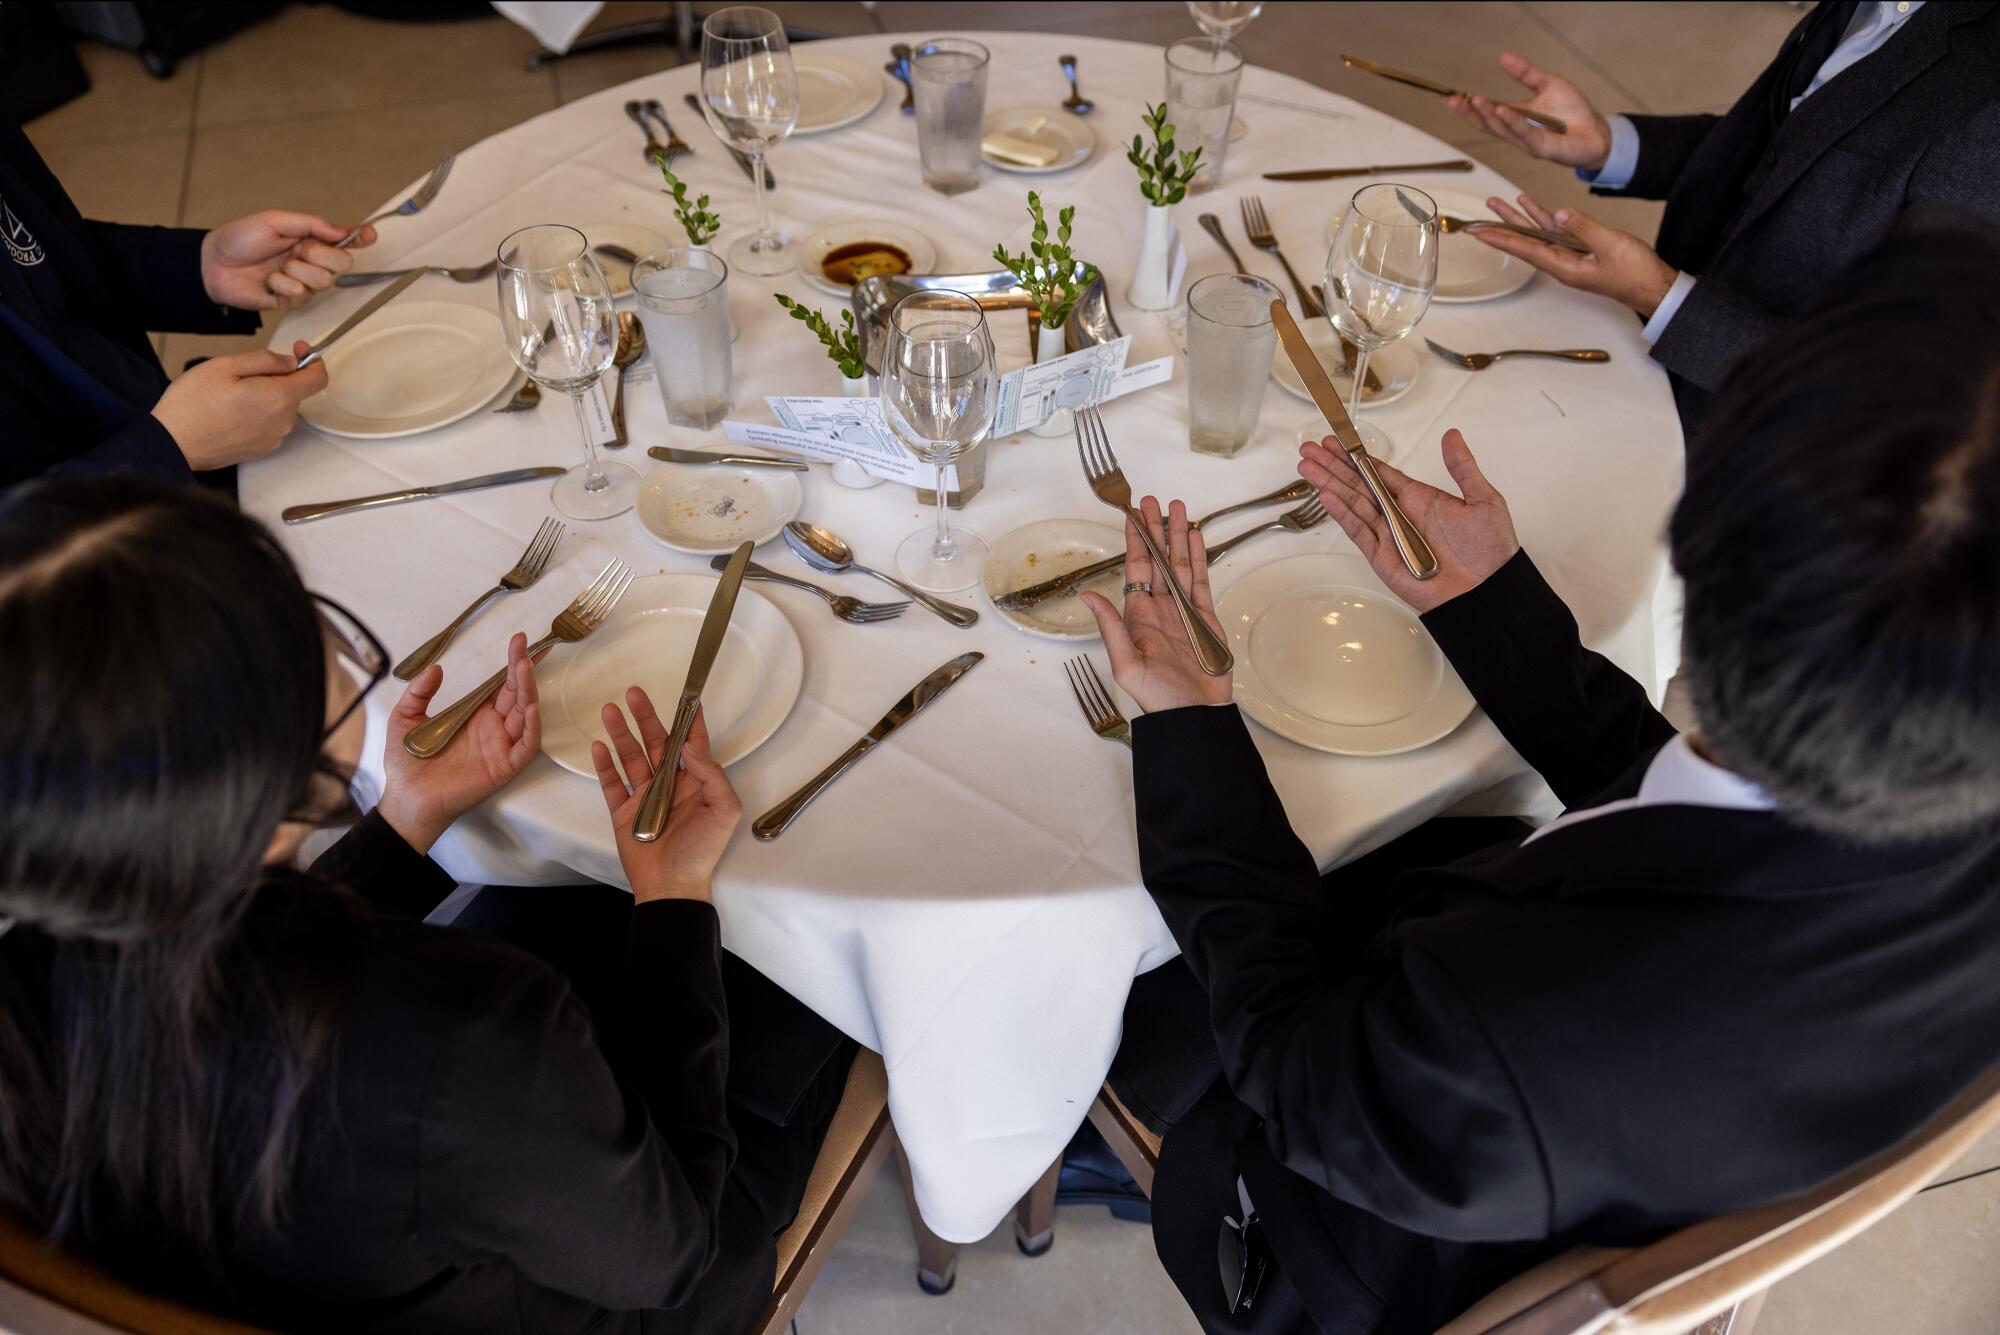 People sitting around a table with utensils in their hands